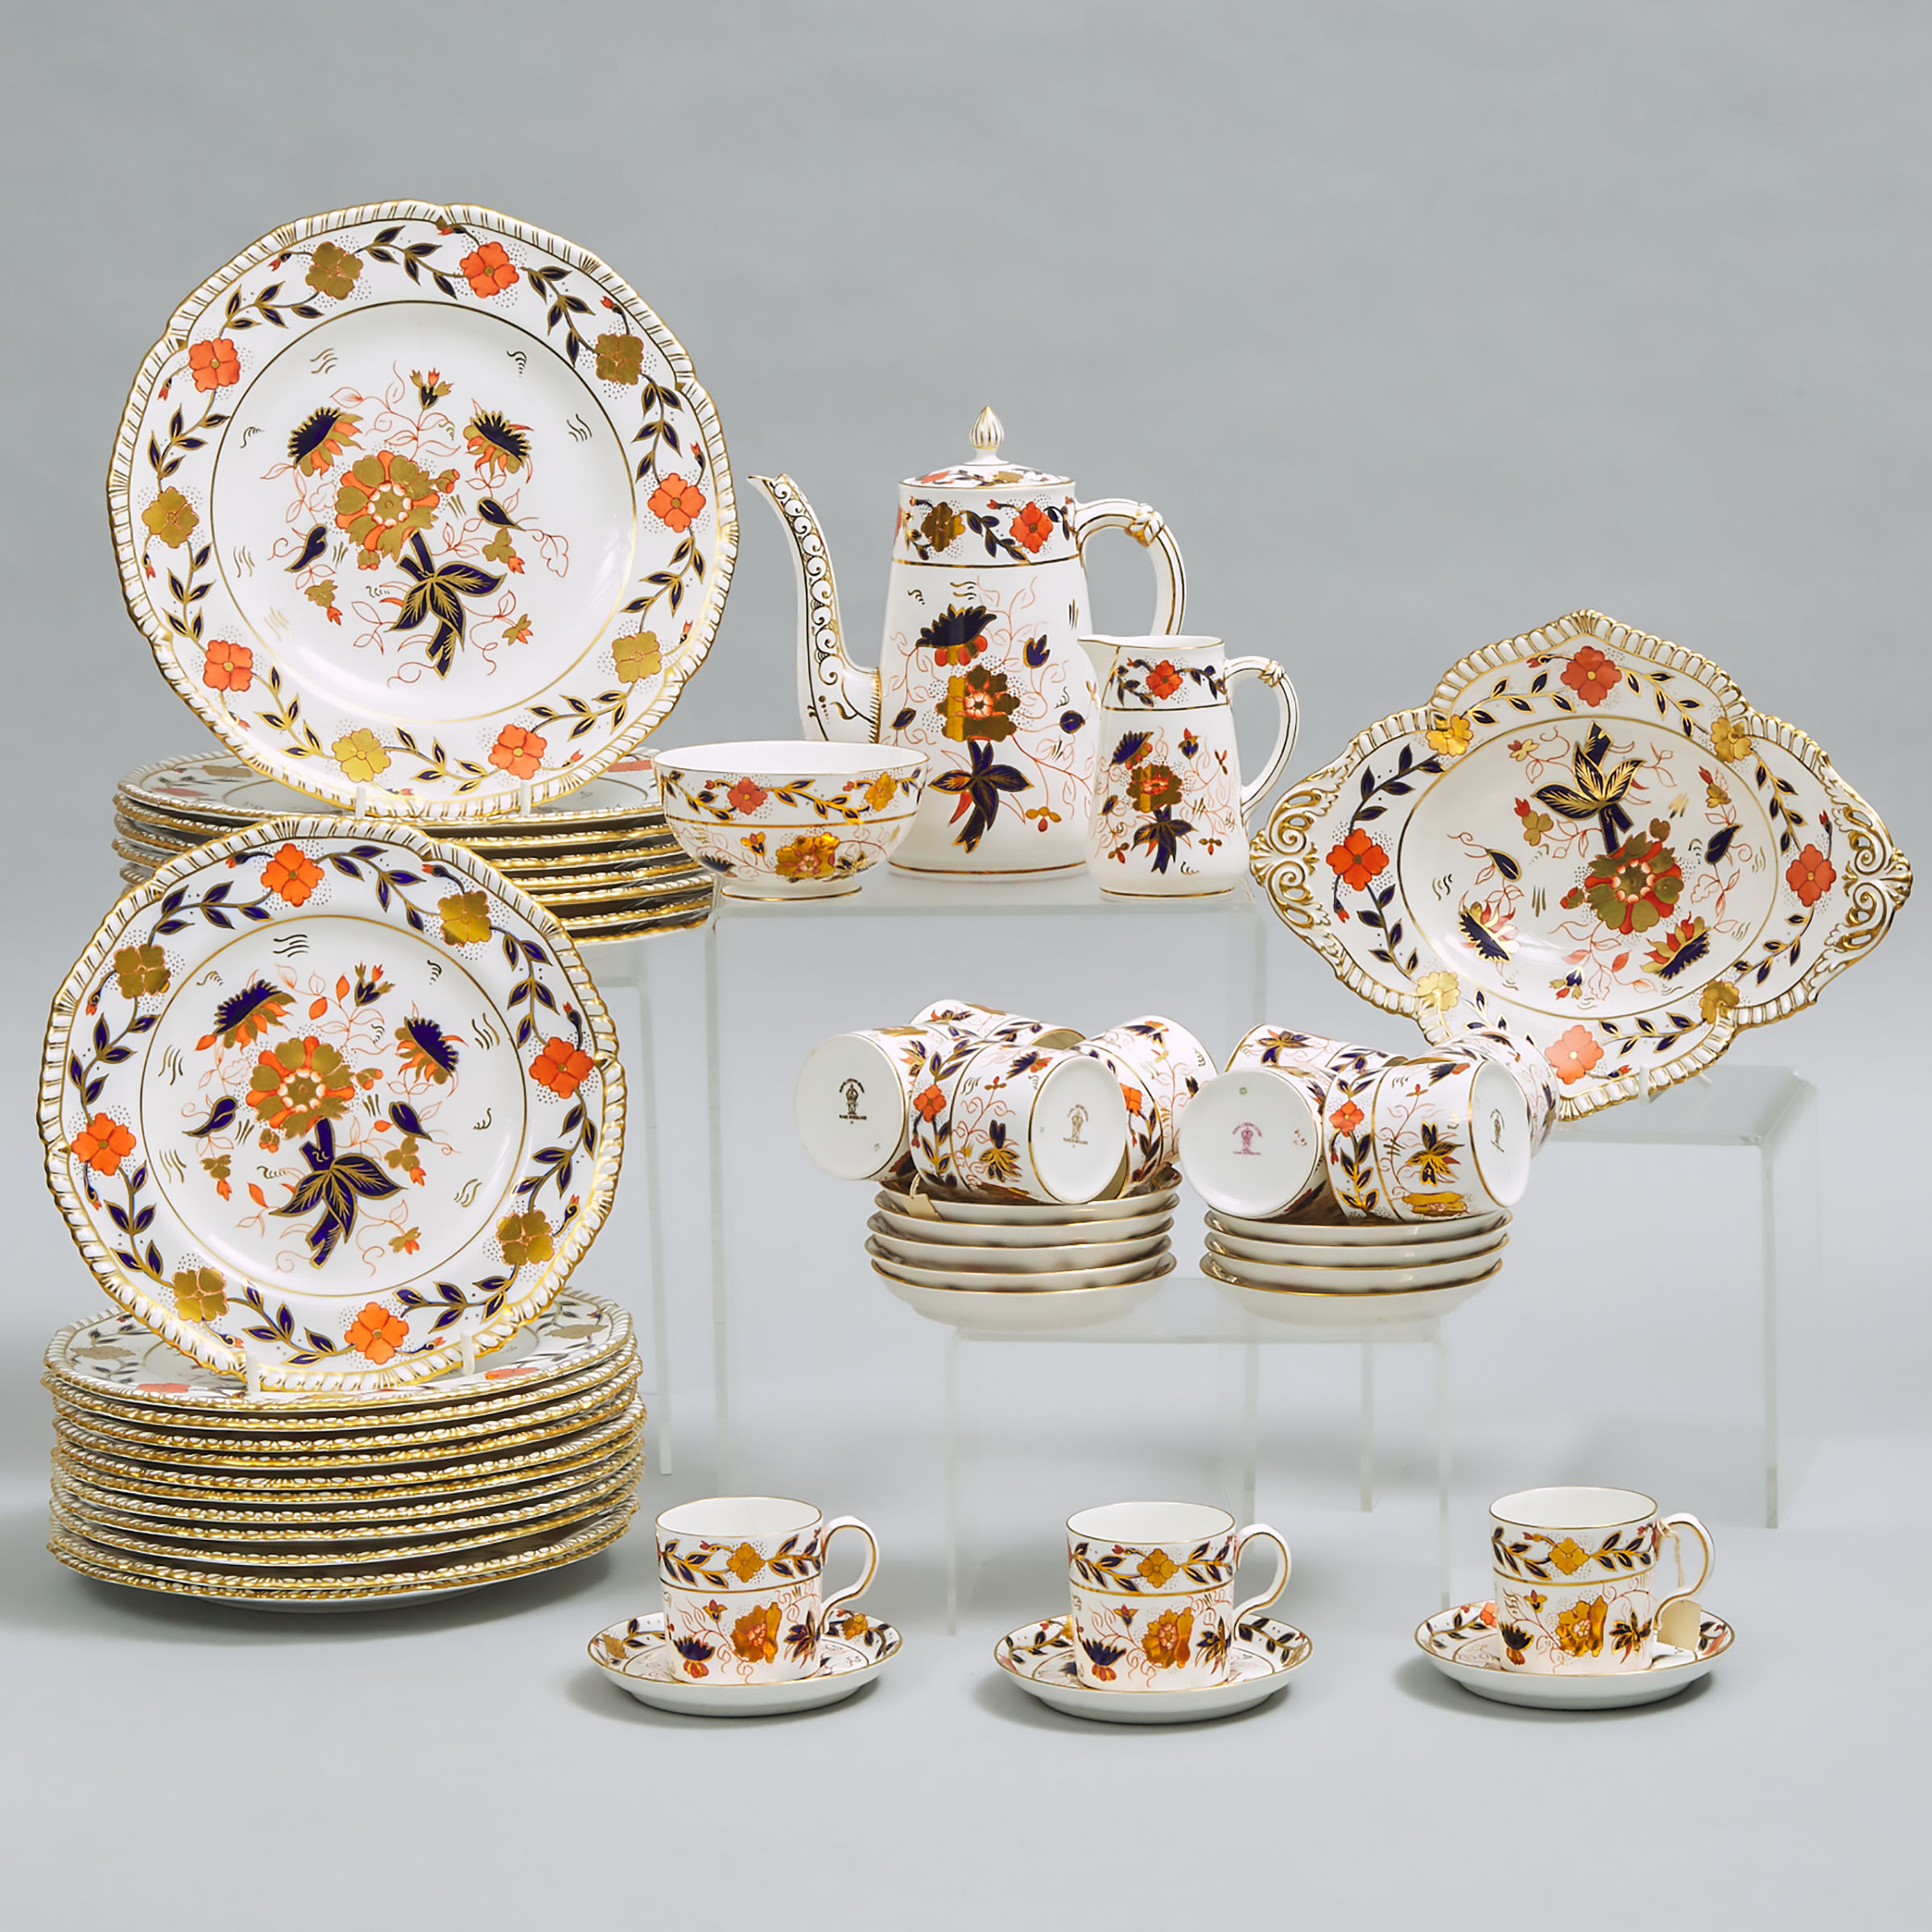 Royal Crown Derby 'Asian Rose' (8687) Pattern Service, 20th century